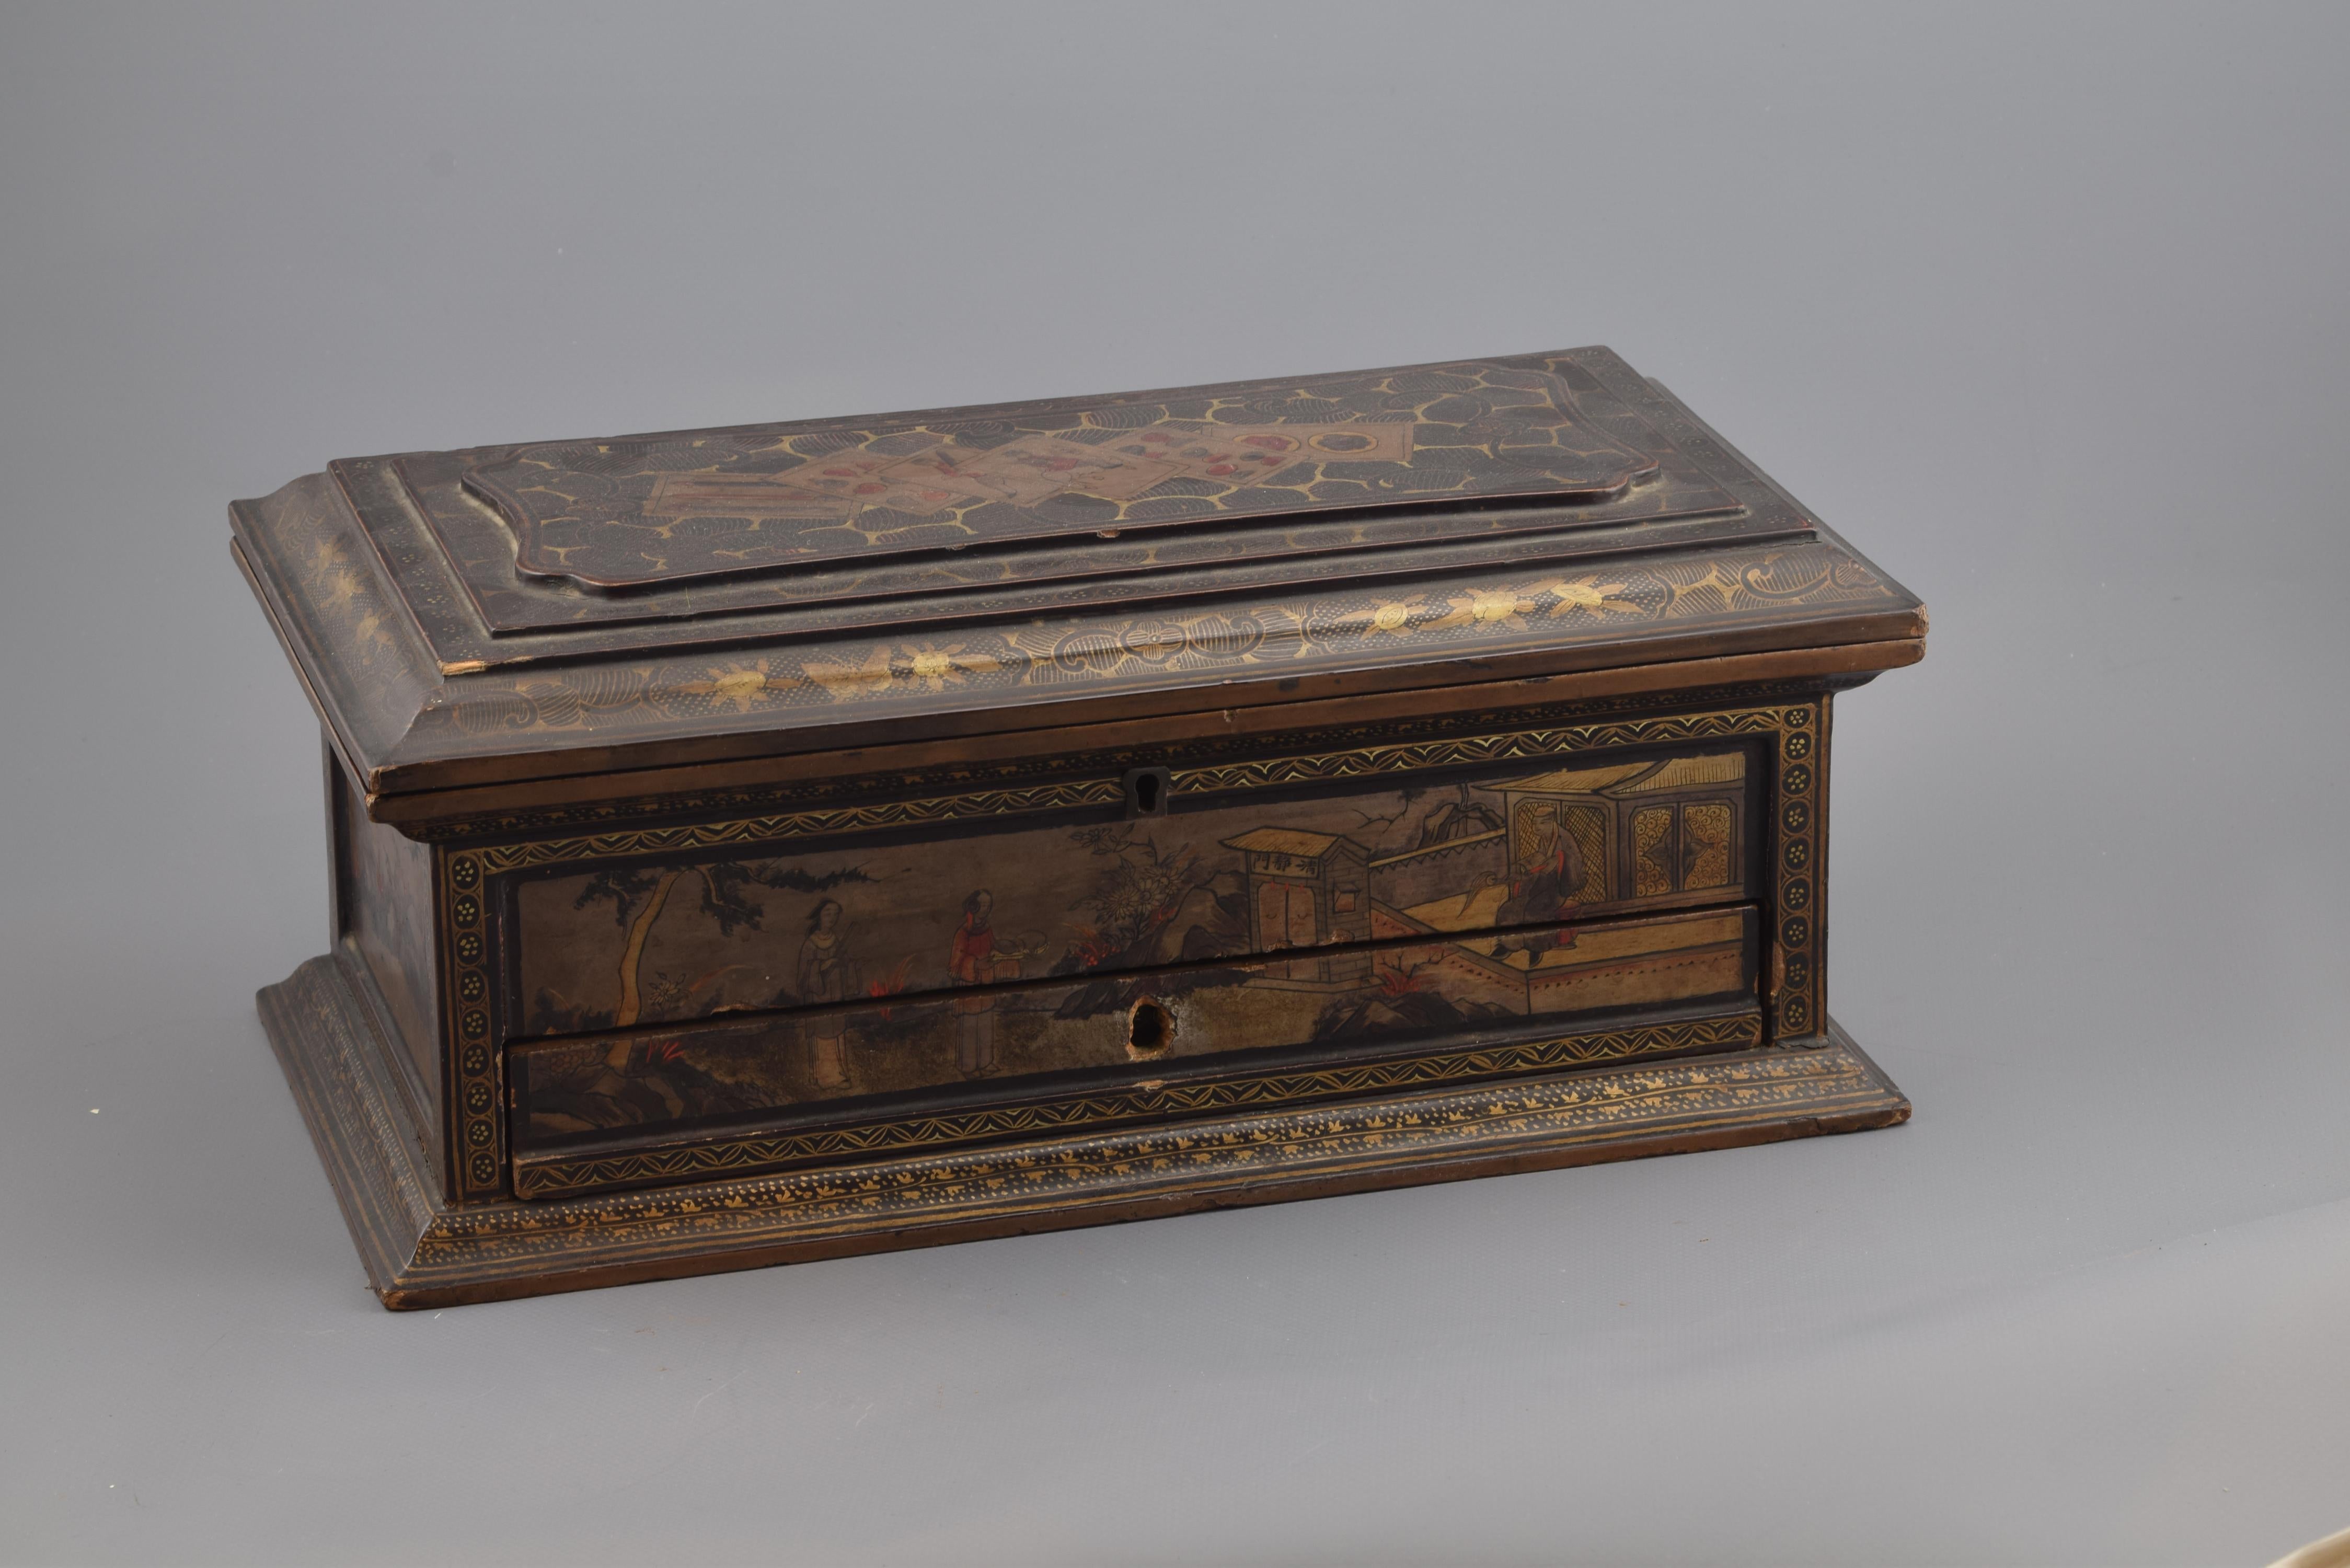 Rectangular box of slightly elevated flat lid that has two bolts in front. To the exterior, the decoration shows a clear influence of traditional Chinese art, both in the landscapes and scenes of the fronts and in the cover. When opening the upper